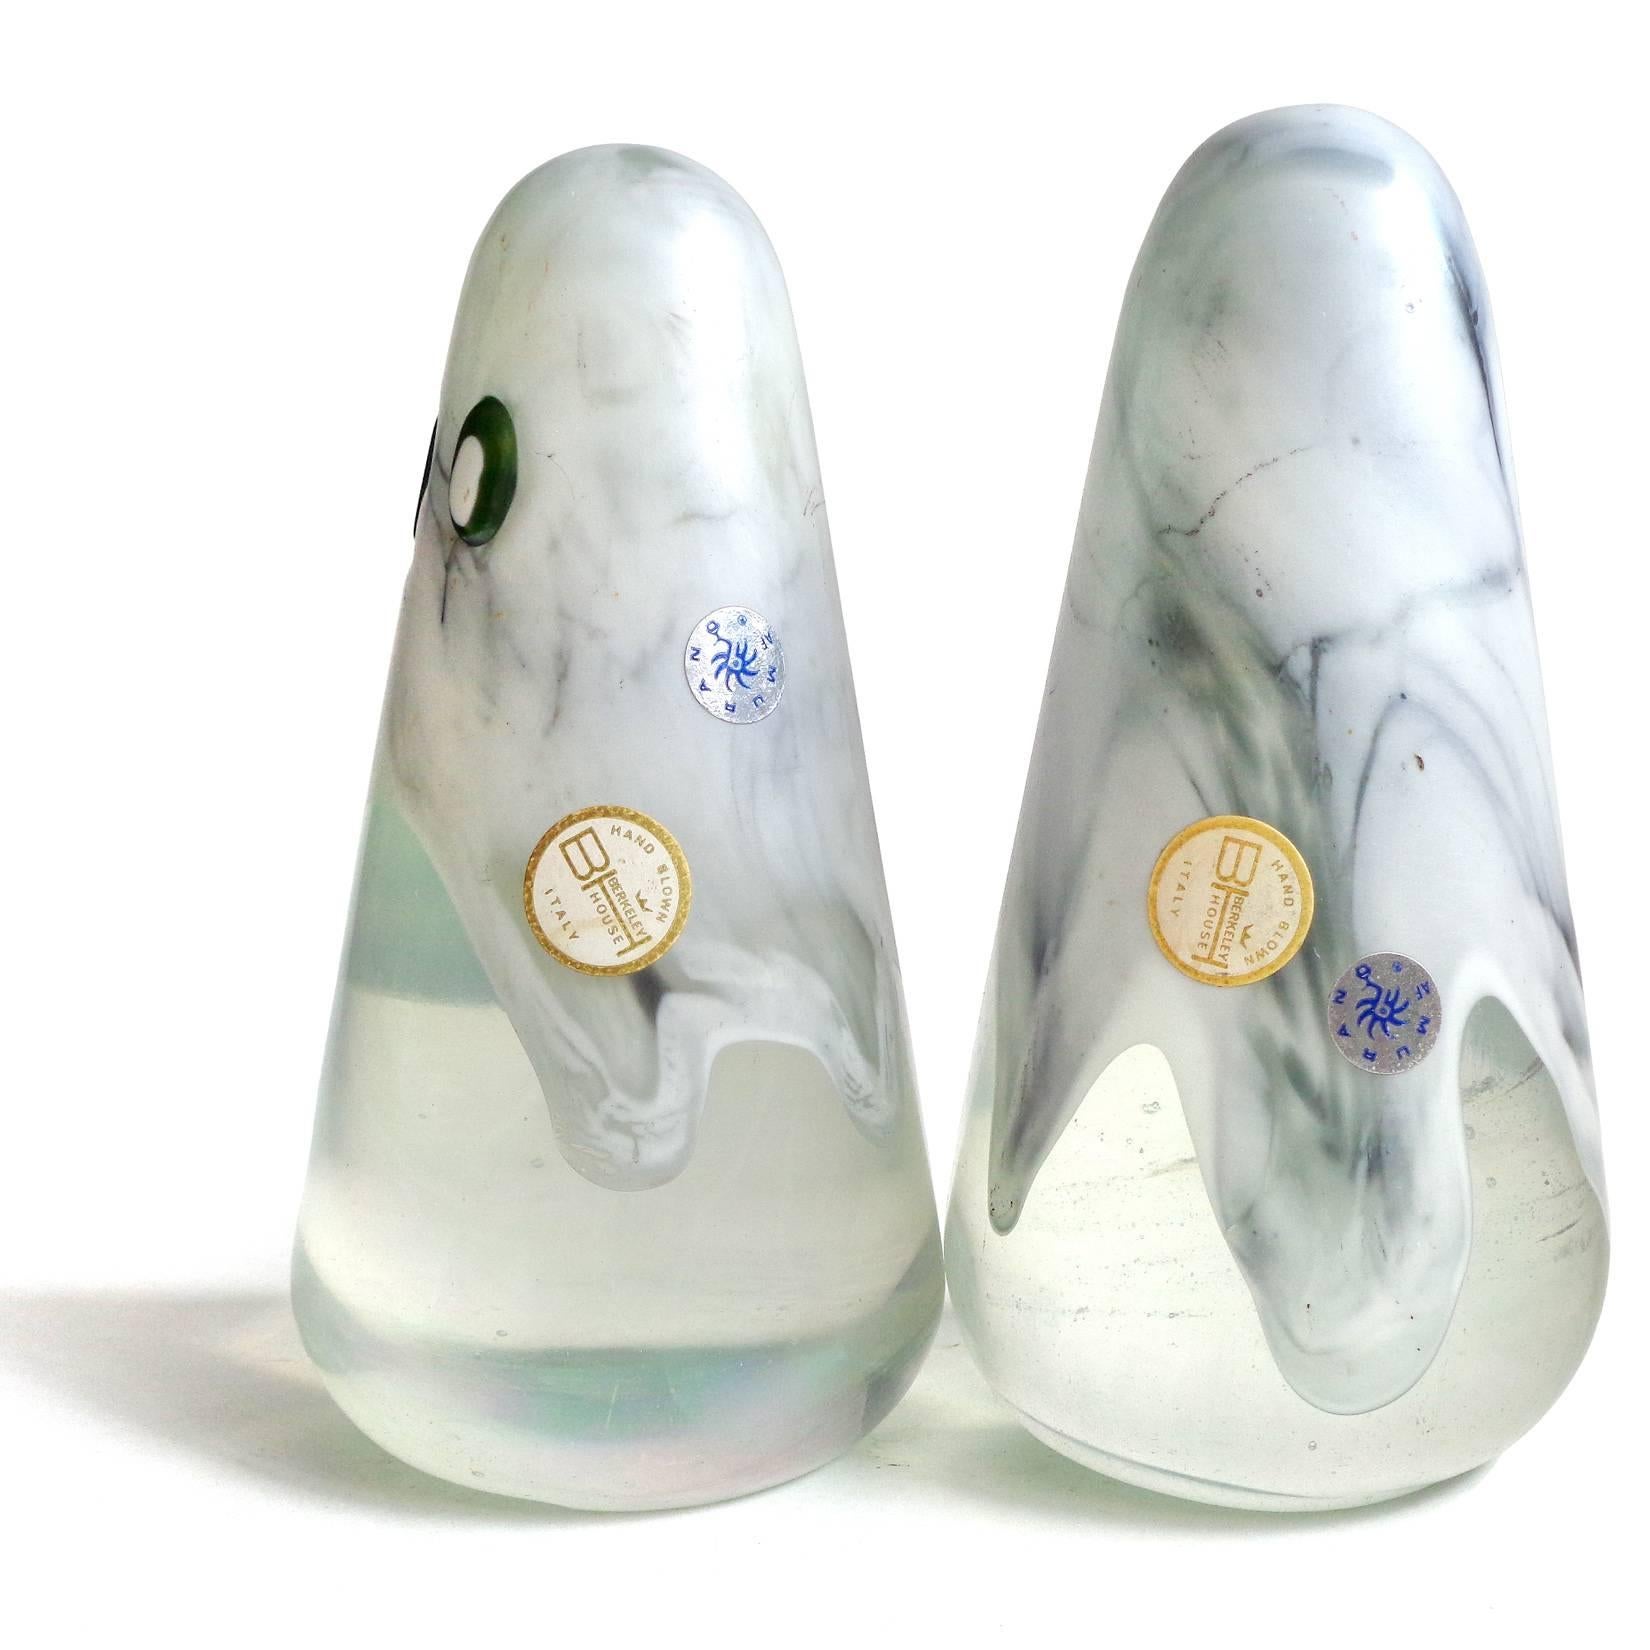 FREE Shipping Worldwide! See details below description.

Awesome and very cute set of 2 Murano hand blown iridescent art glass ghost paperweight figurines. Created by and labelled 